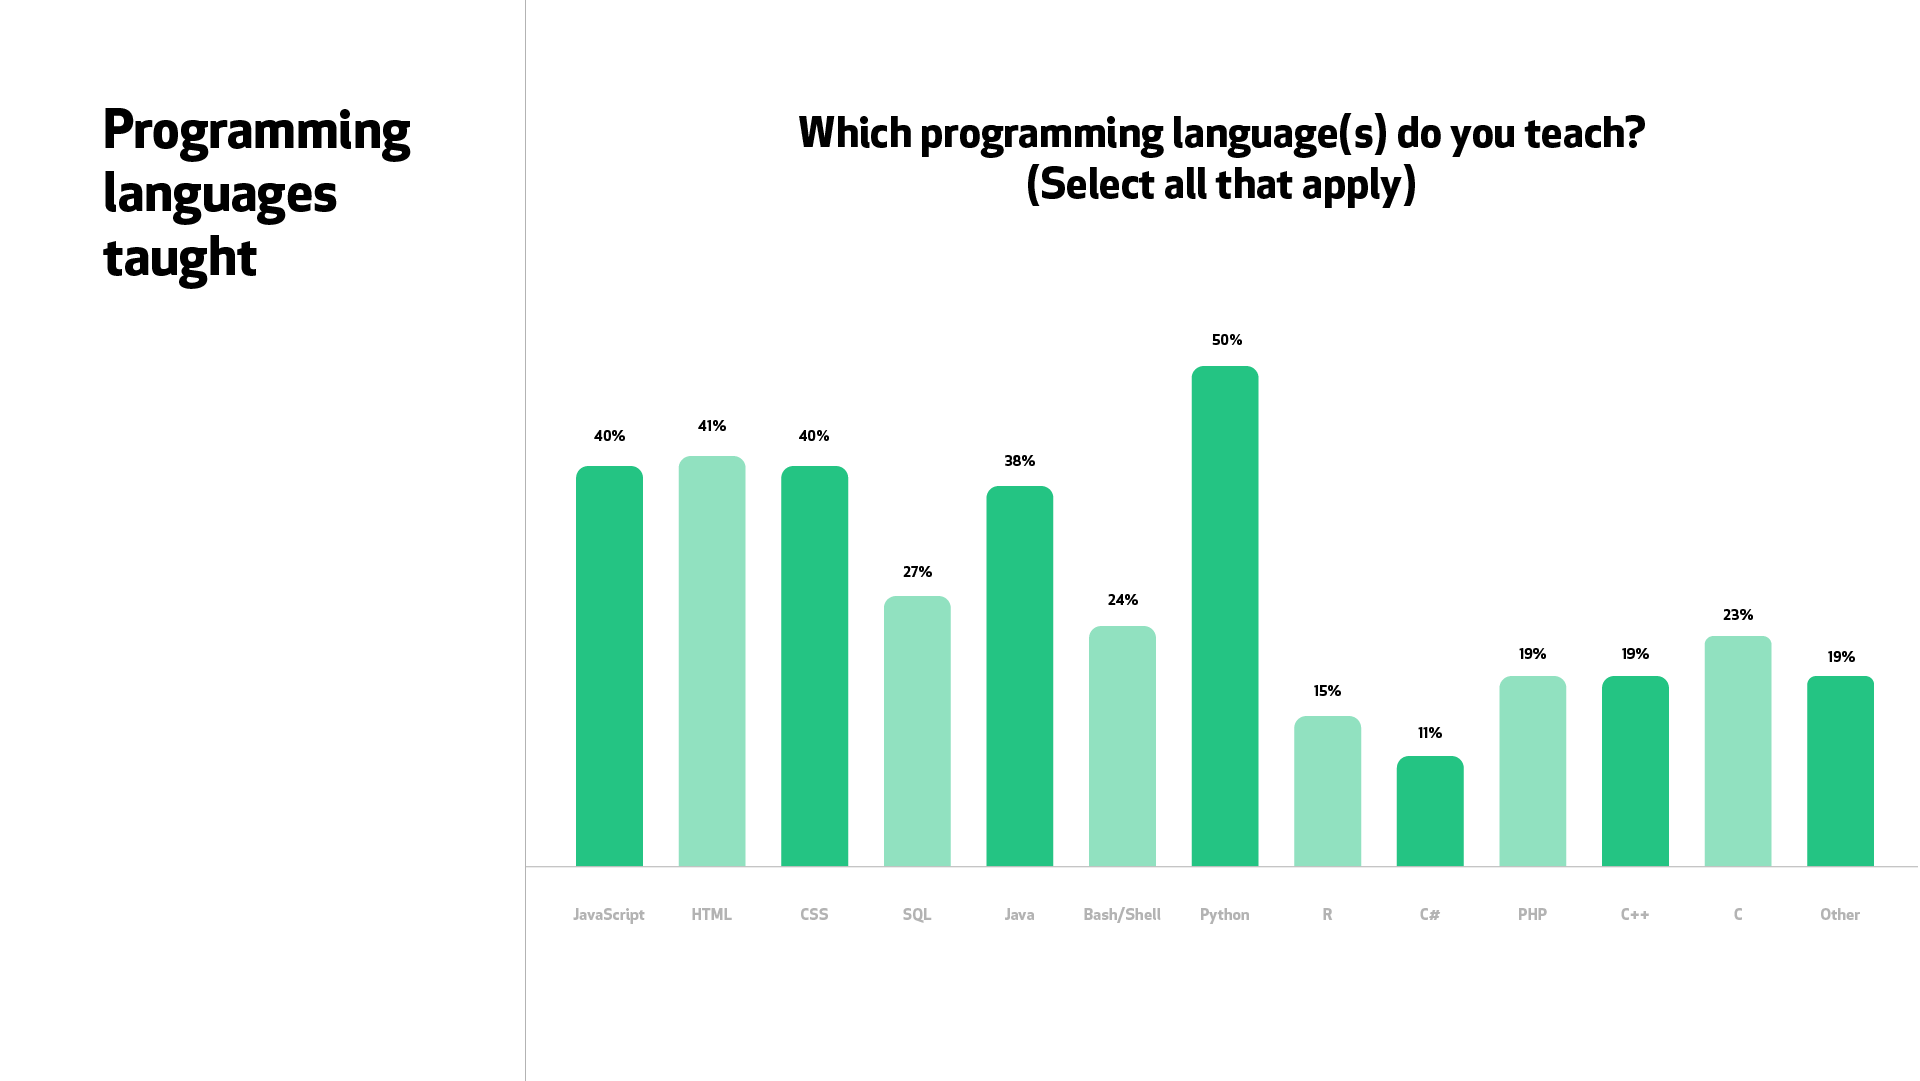 A graph for the question, “Which of the following programming languages do you teach?” Python (50%), HTML (41%), JavaScript (40%), CSS (40%), and Java (38%) topped the list of responses.